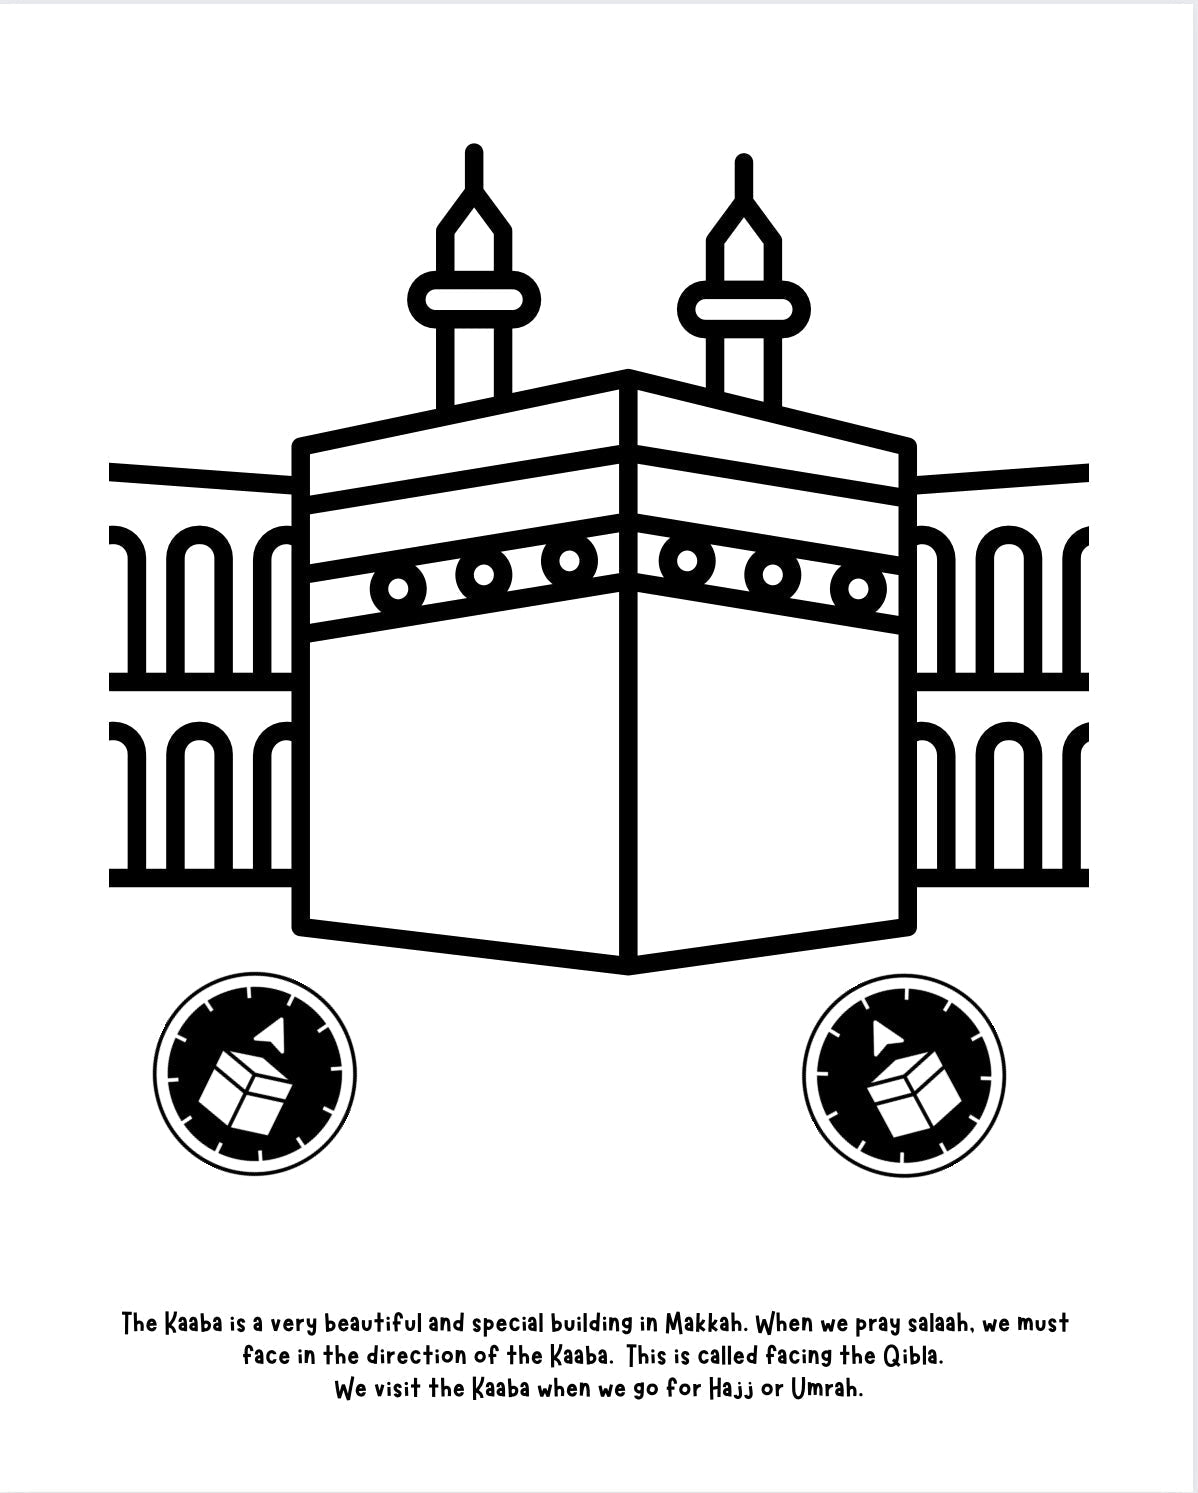 My First Islamic Colouring Book